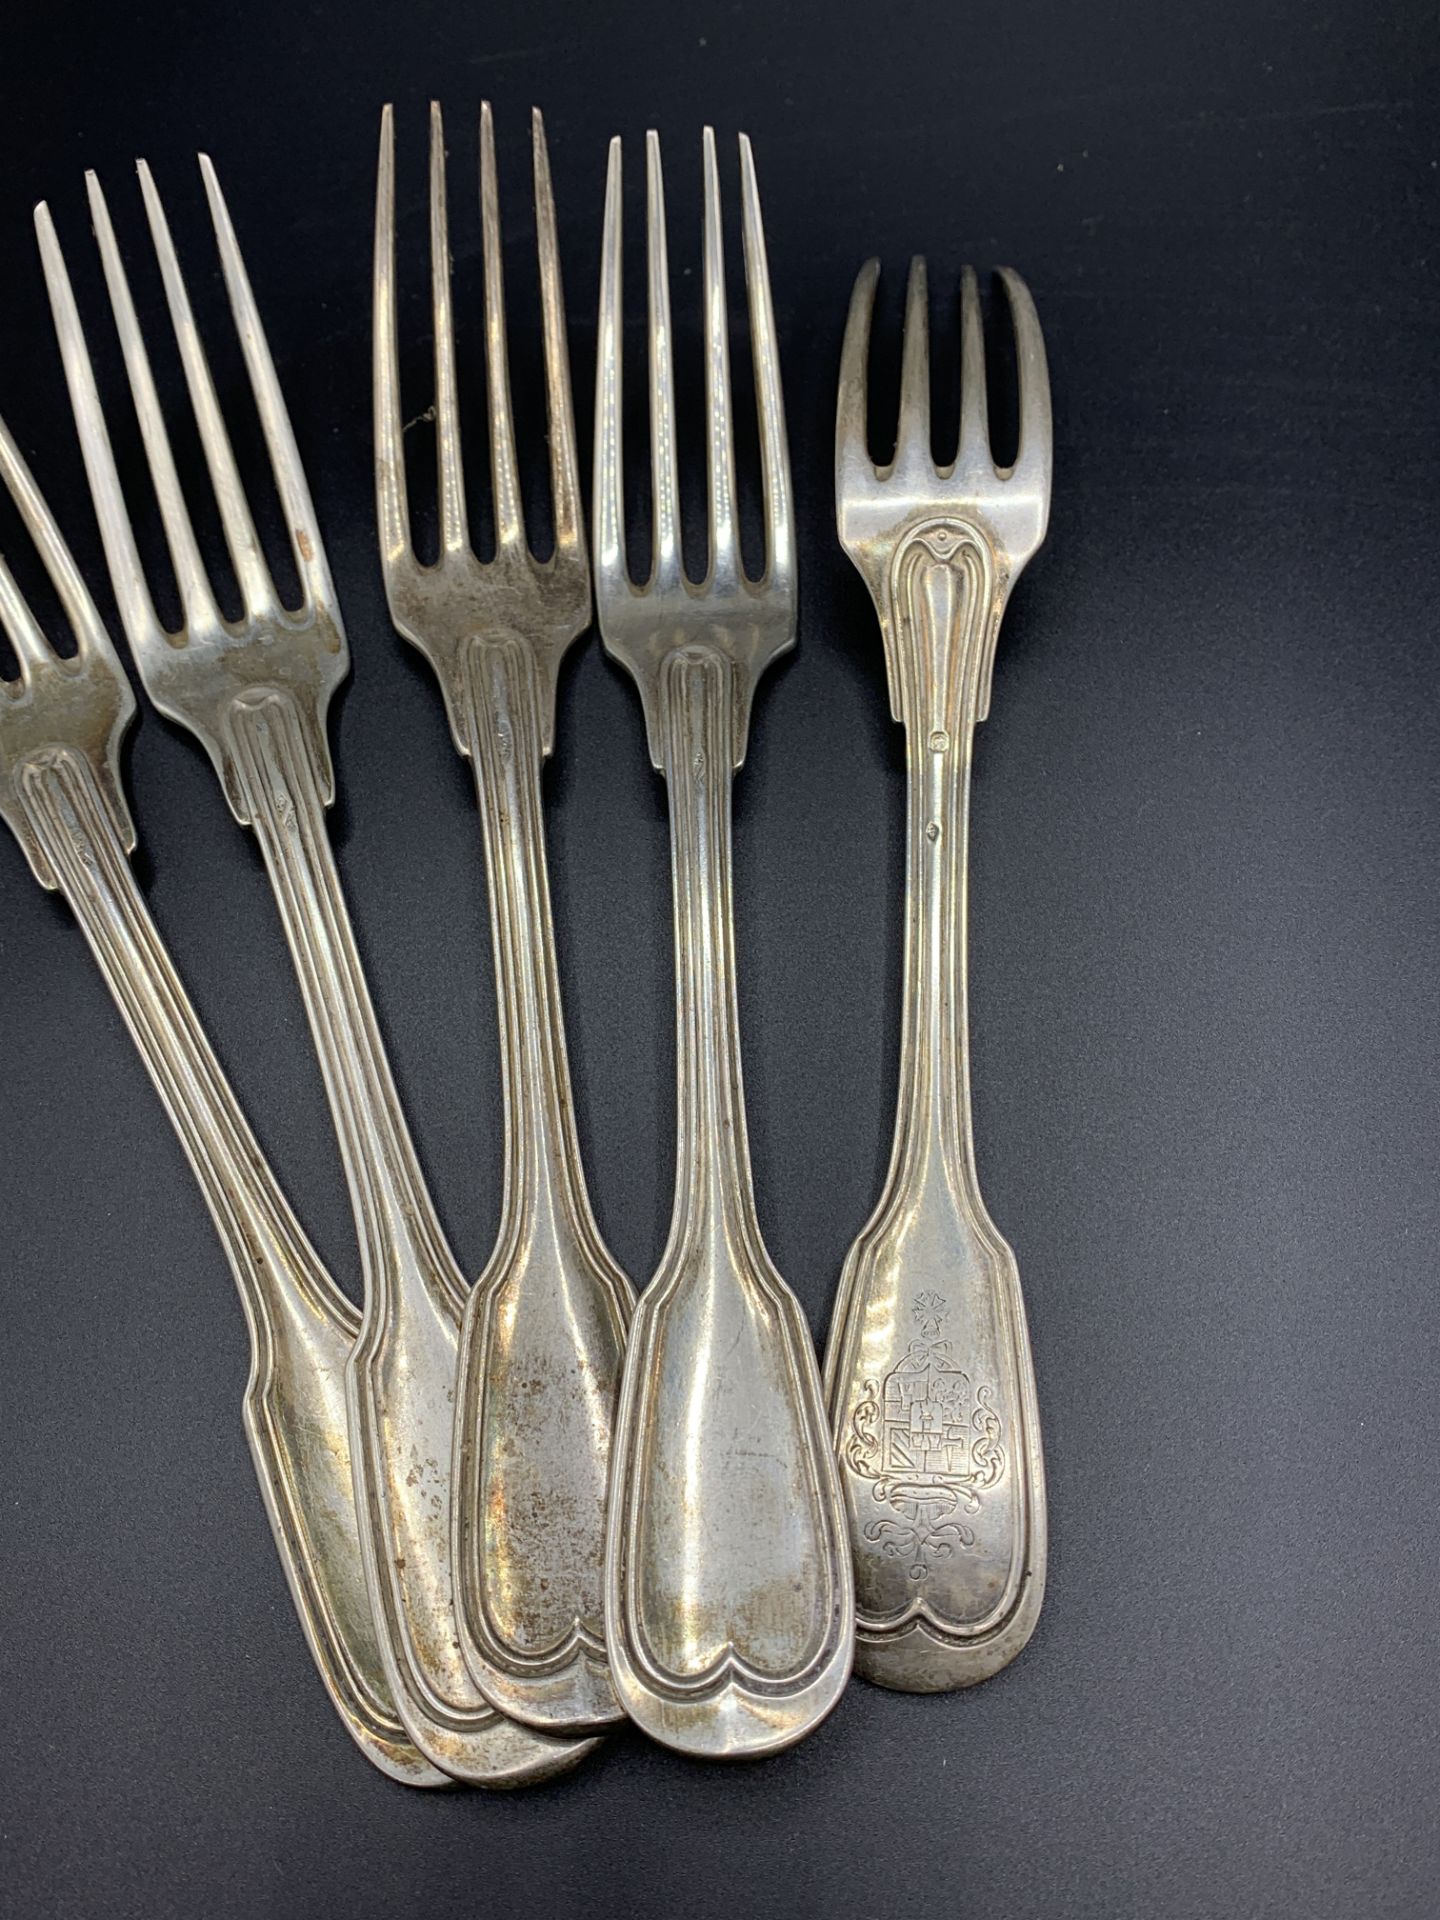 Five large French 800 silver forks - Image 4 of 4